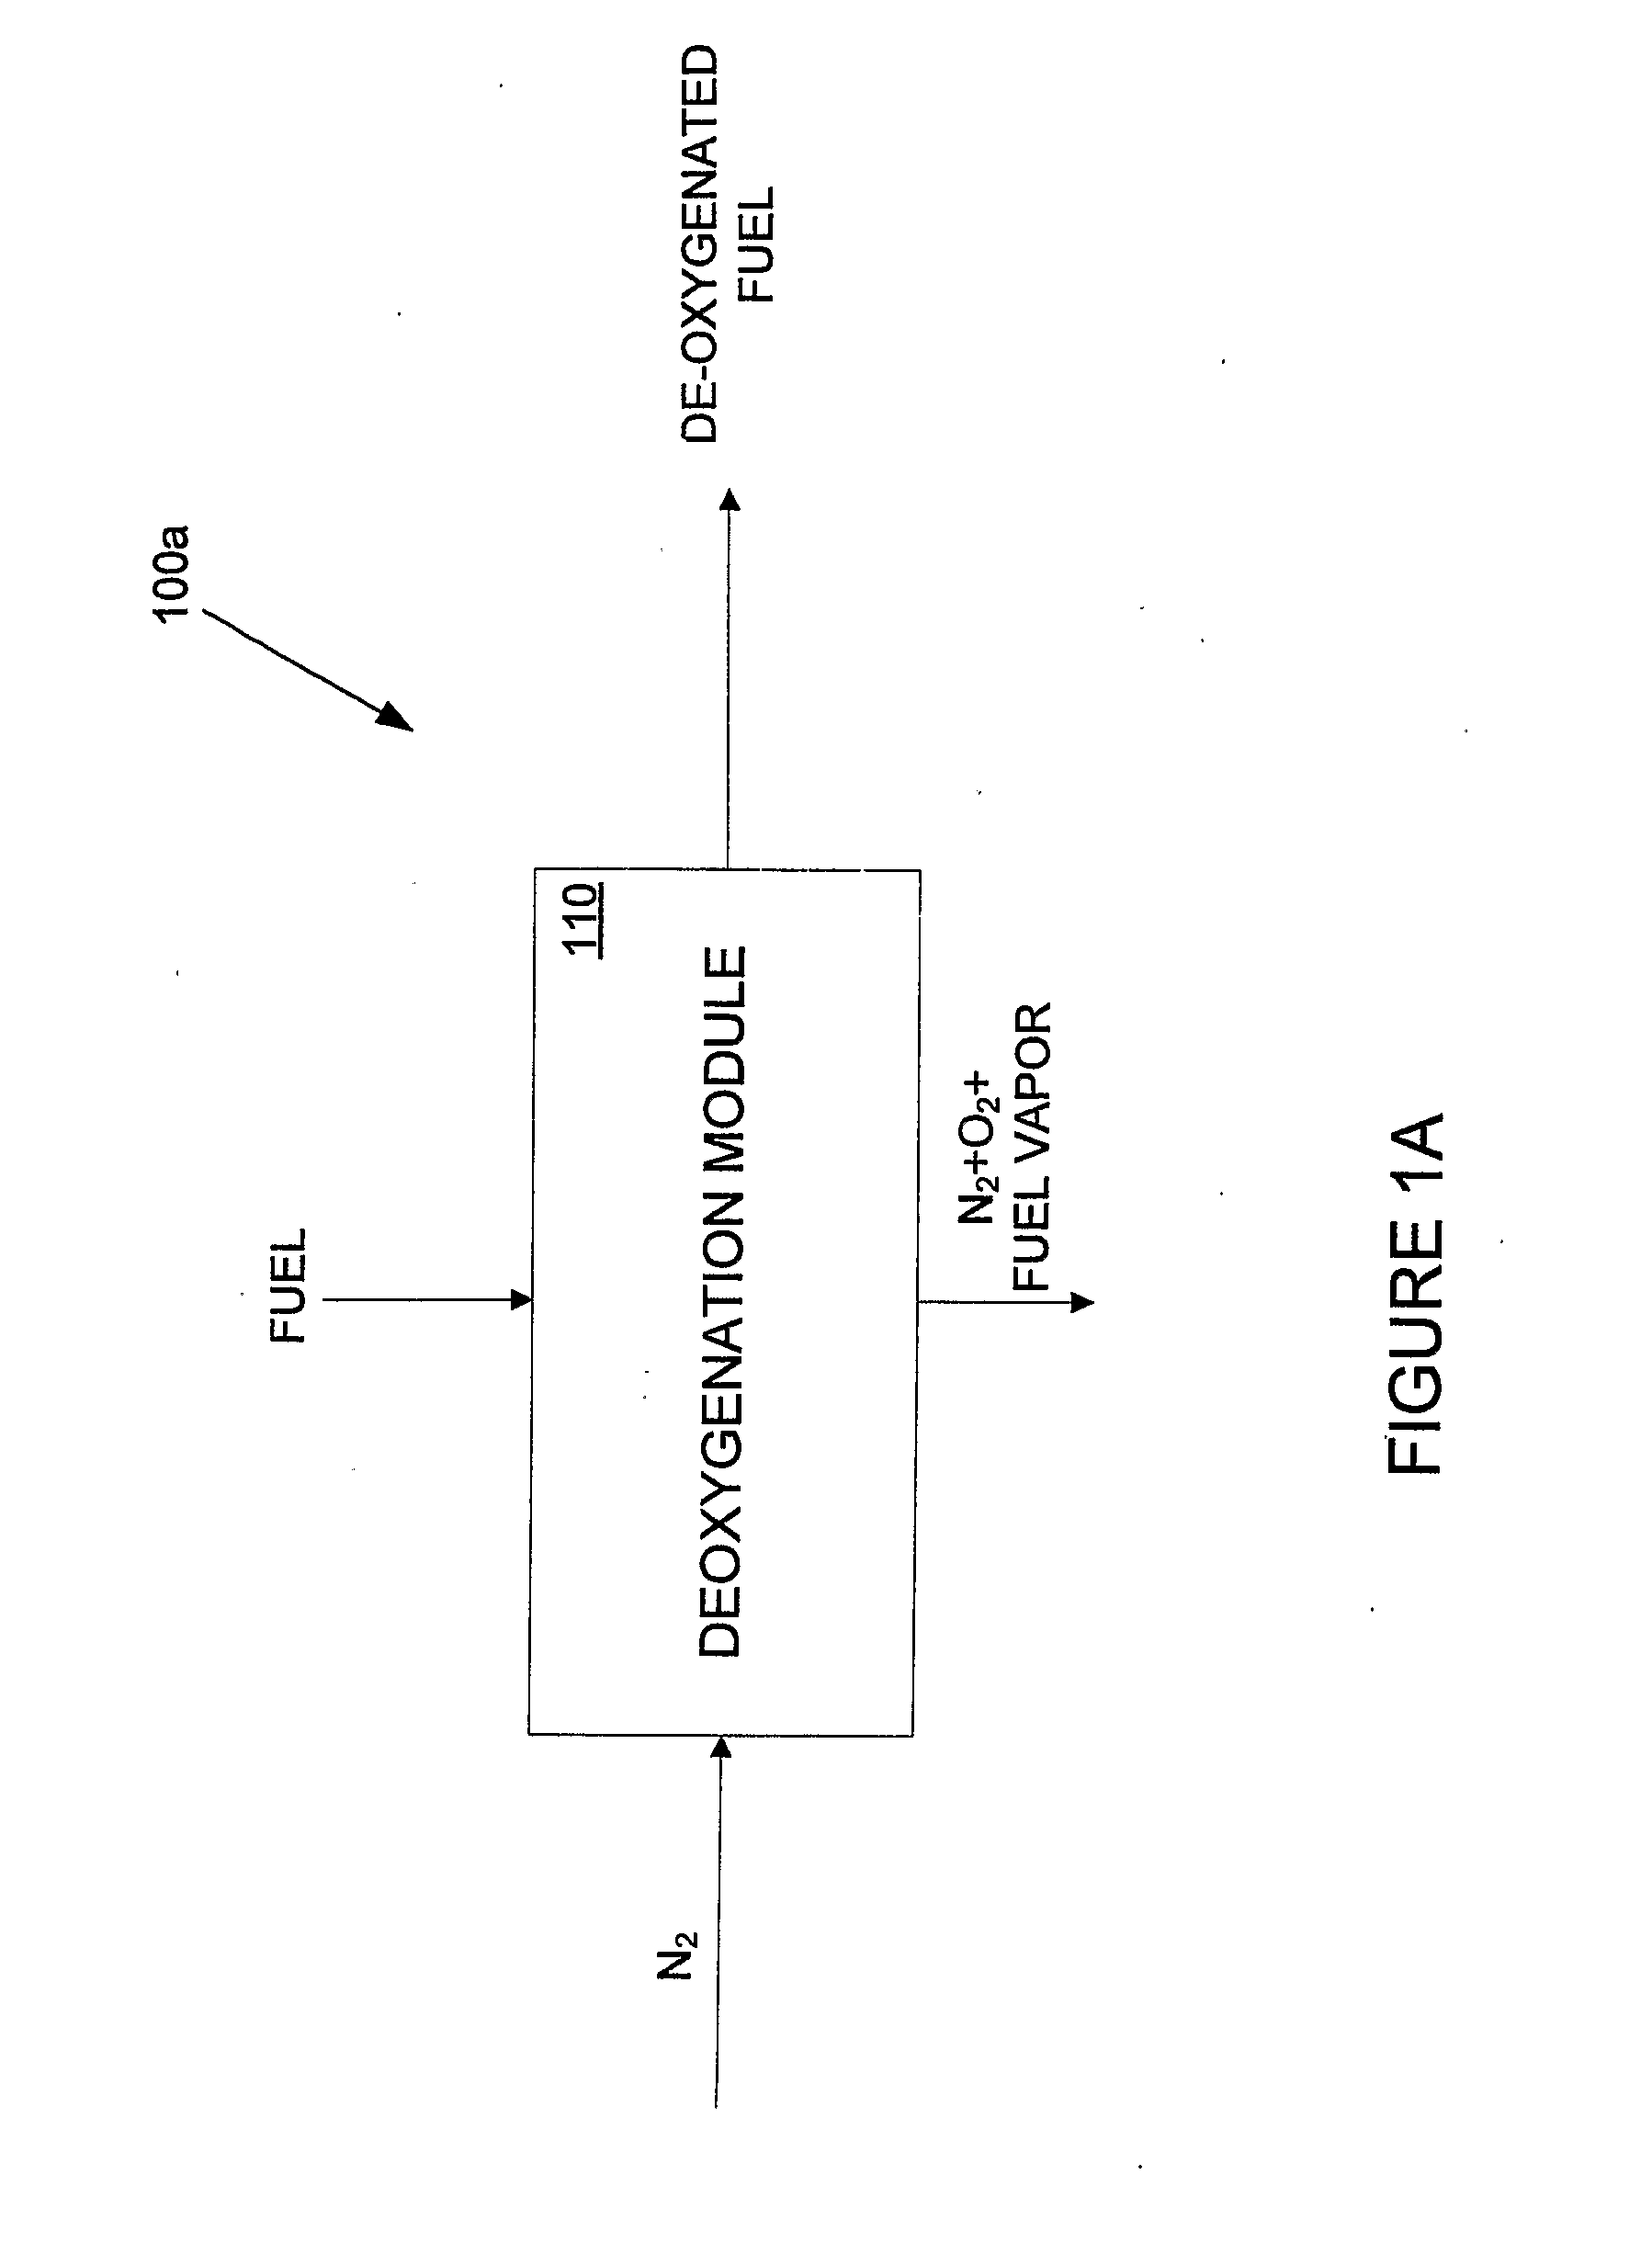 Contacting Systems and Methods and Uses Thereof